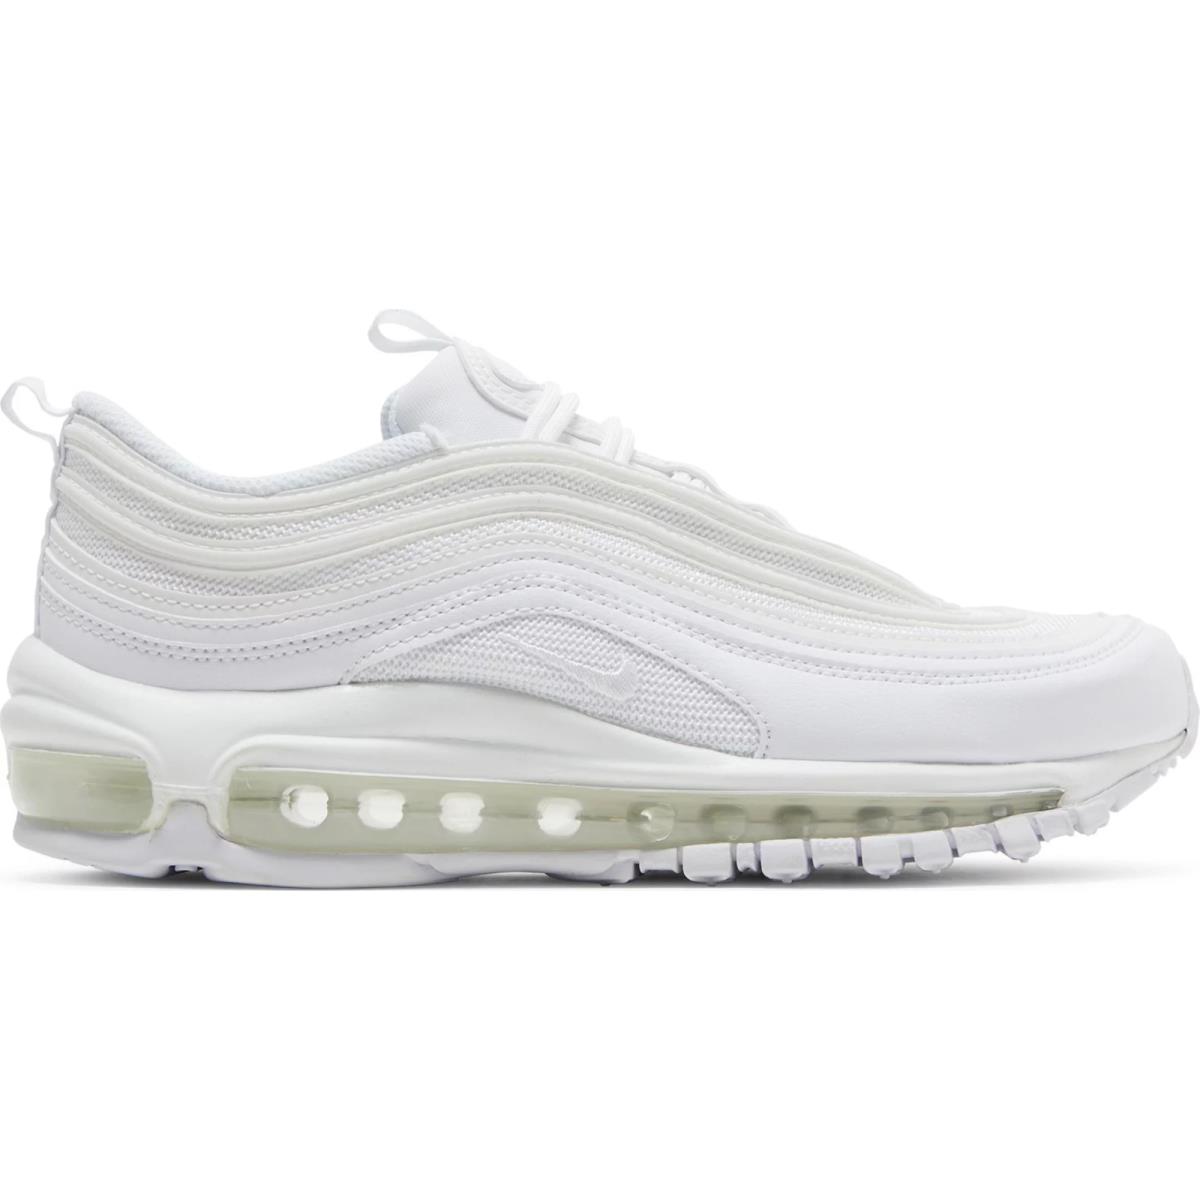 Nike Wmns Air Max 97 Triple White Sneakers Shoes DH8016-100 Multiple Sizes